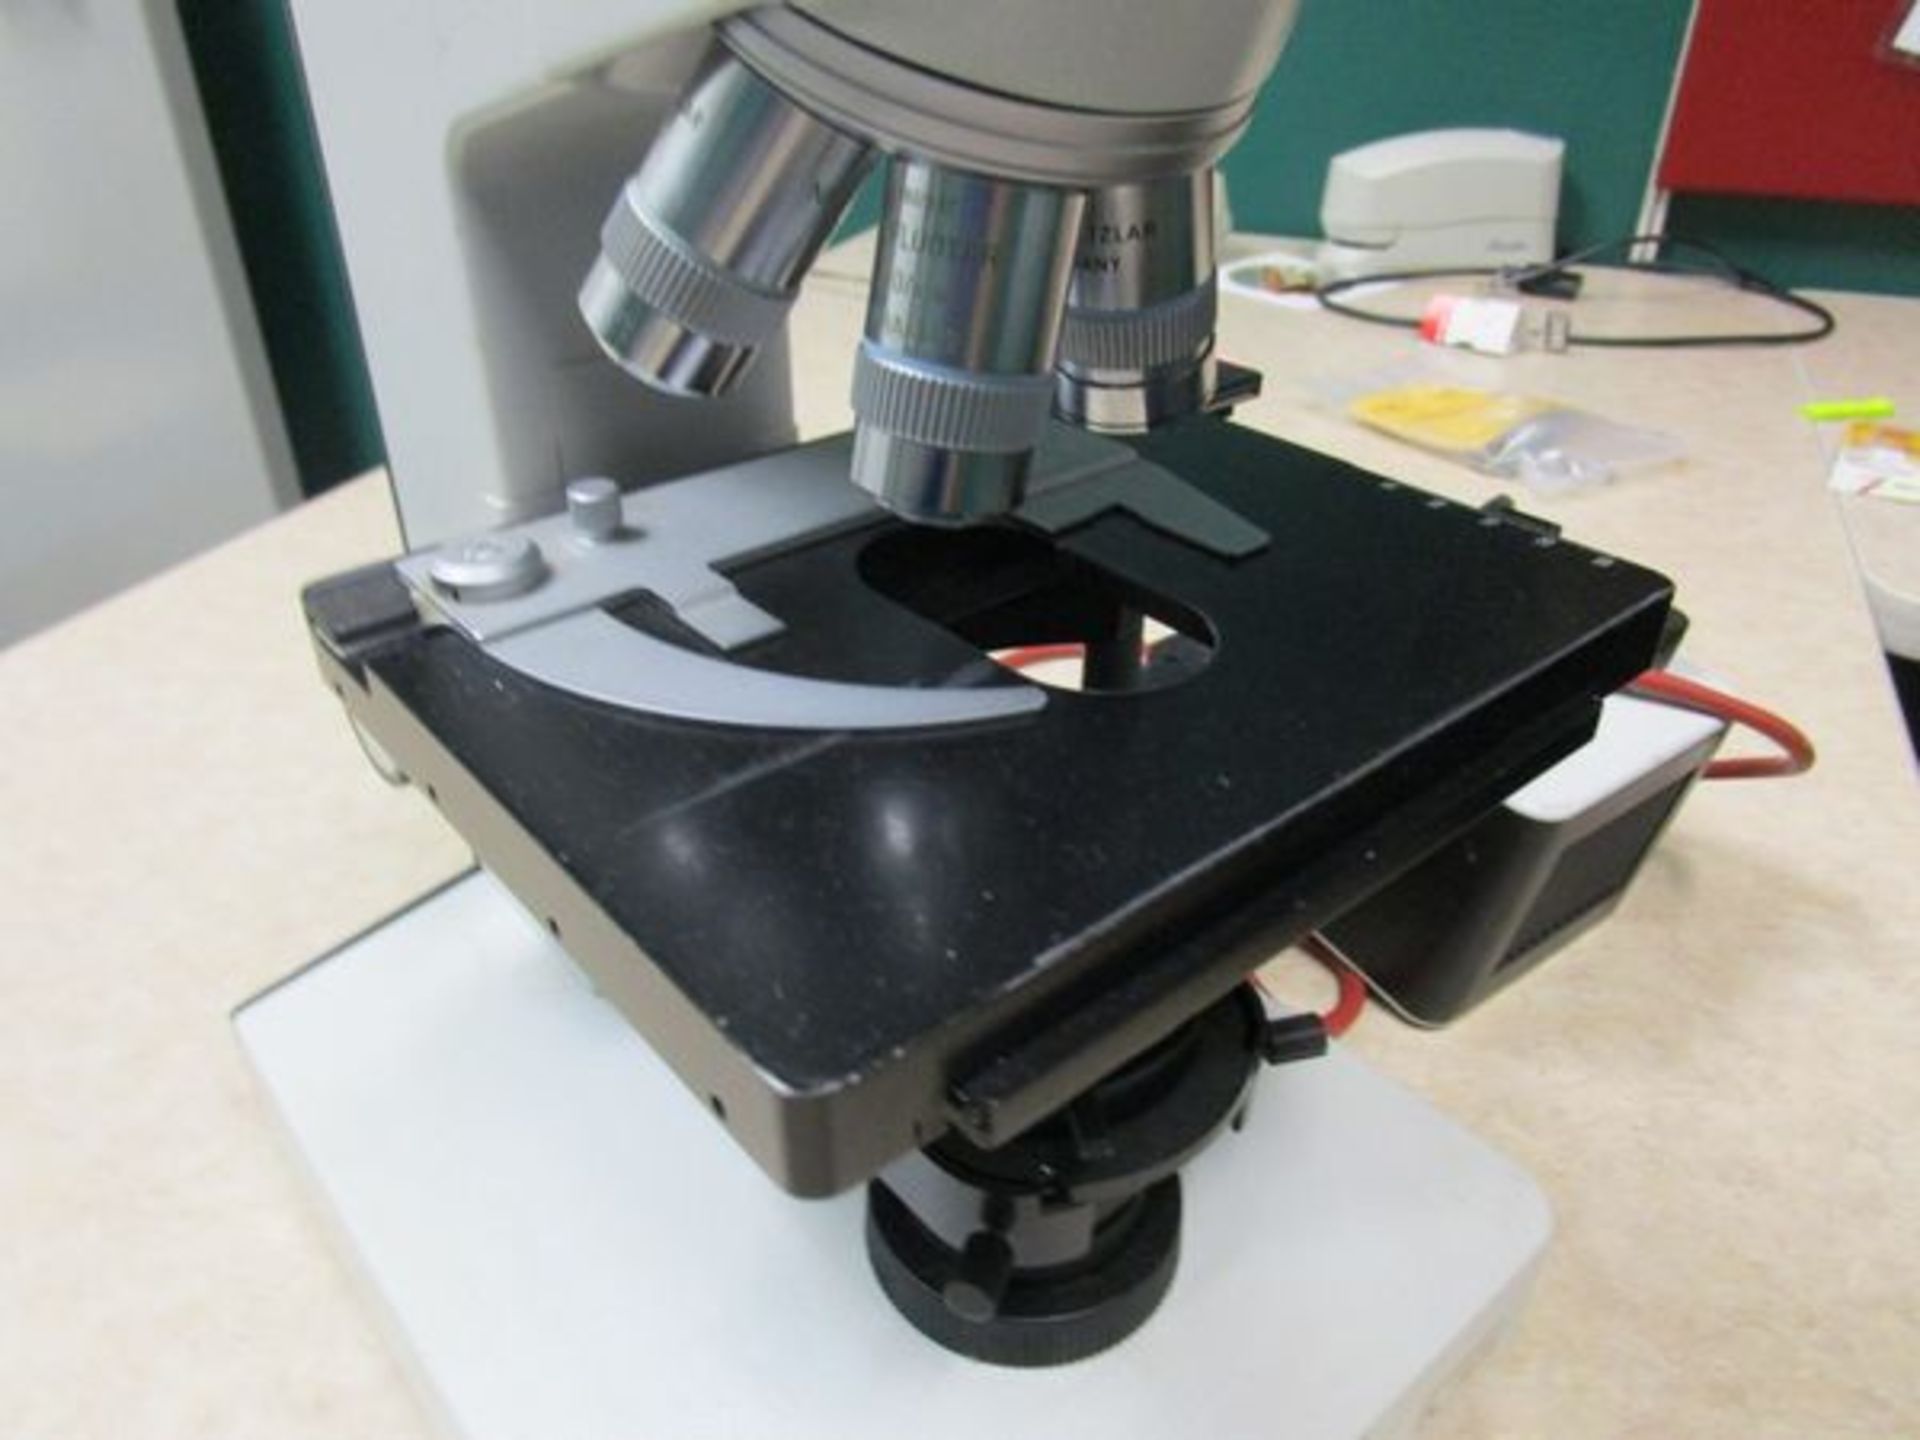 Leitz Model Laborlux K  Microscope , , with X, Y Translation Stage with Clip, 10x Magnification - Image 3 of 4